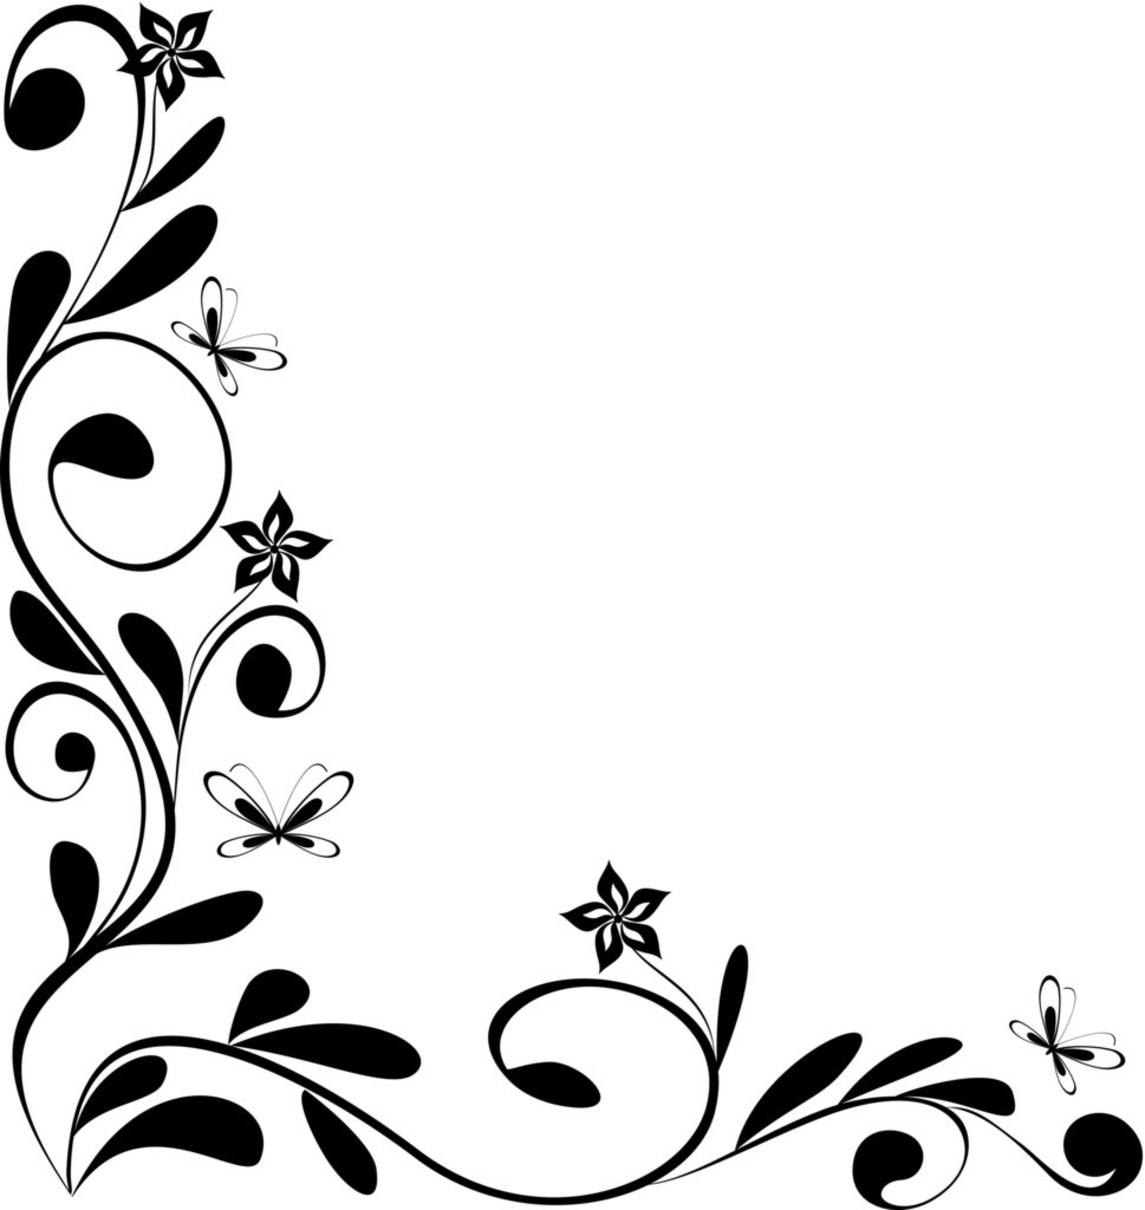 Design Patterns For Borders - ClipArt Best